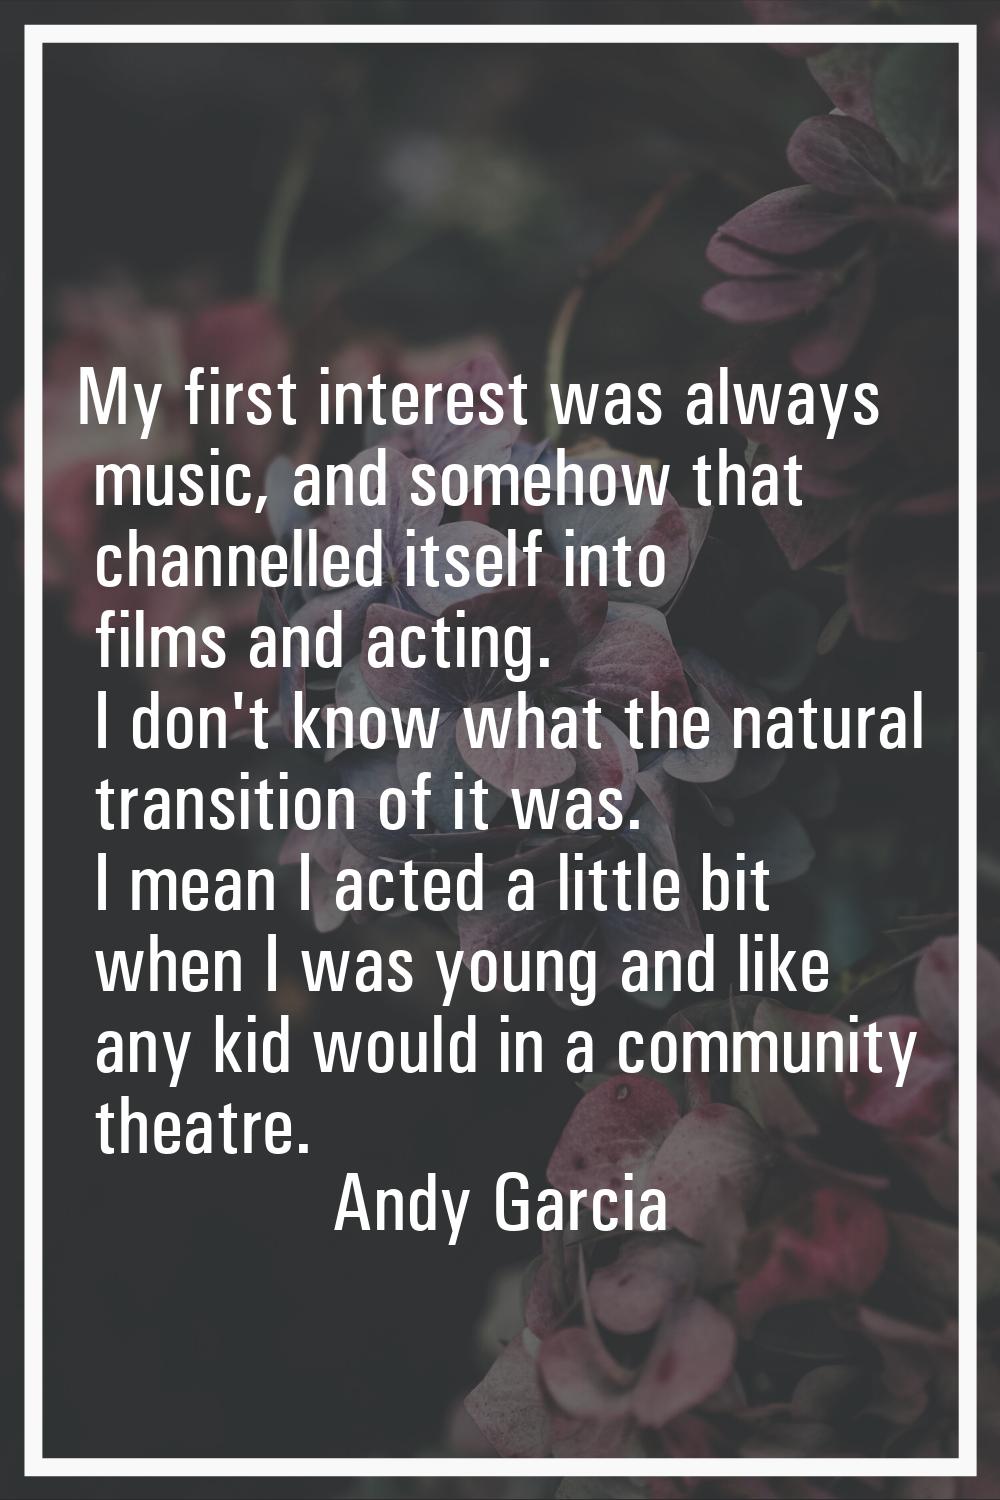 My first interest was always music, and somehow that channelled itself into films and acting. I don